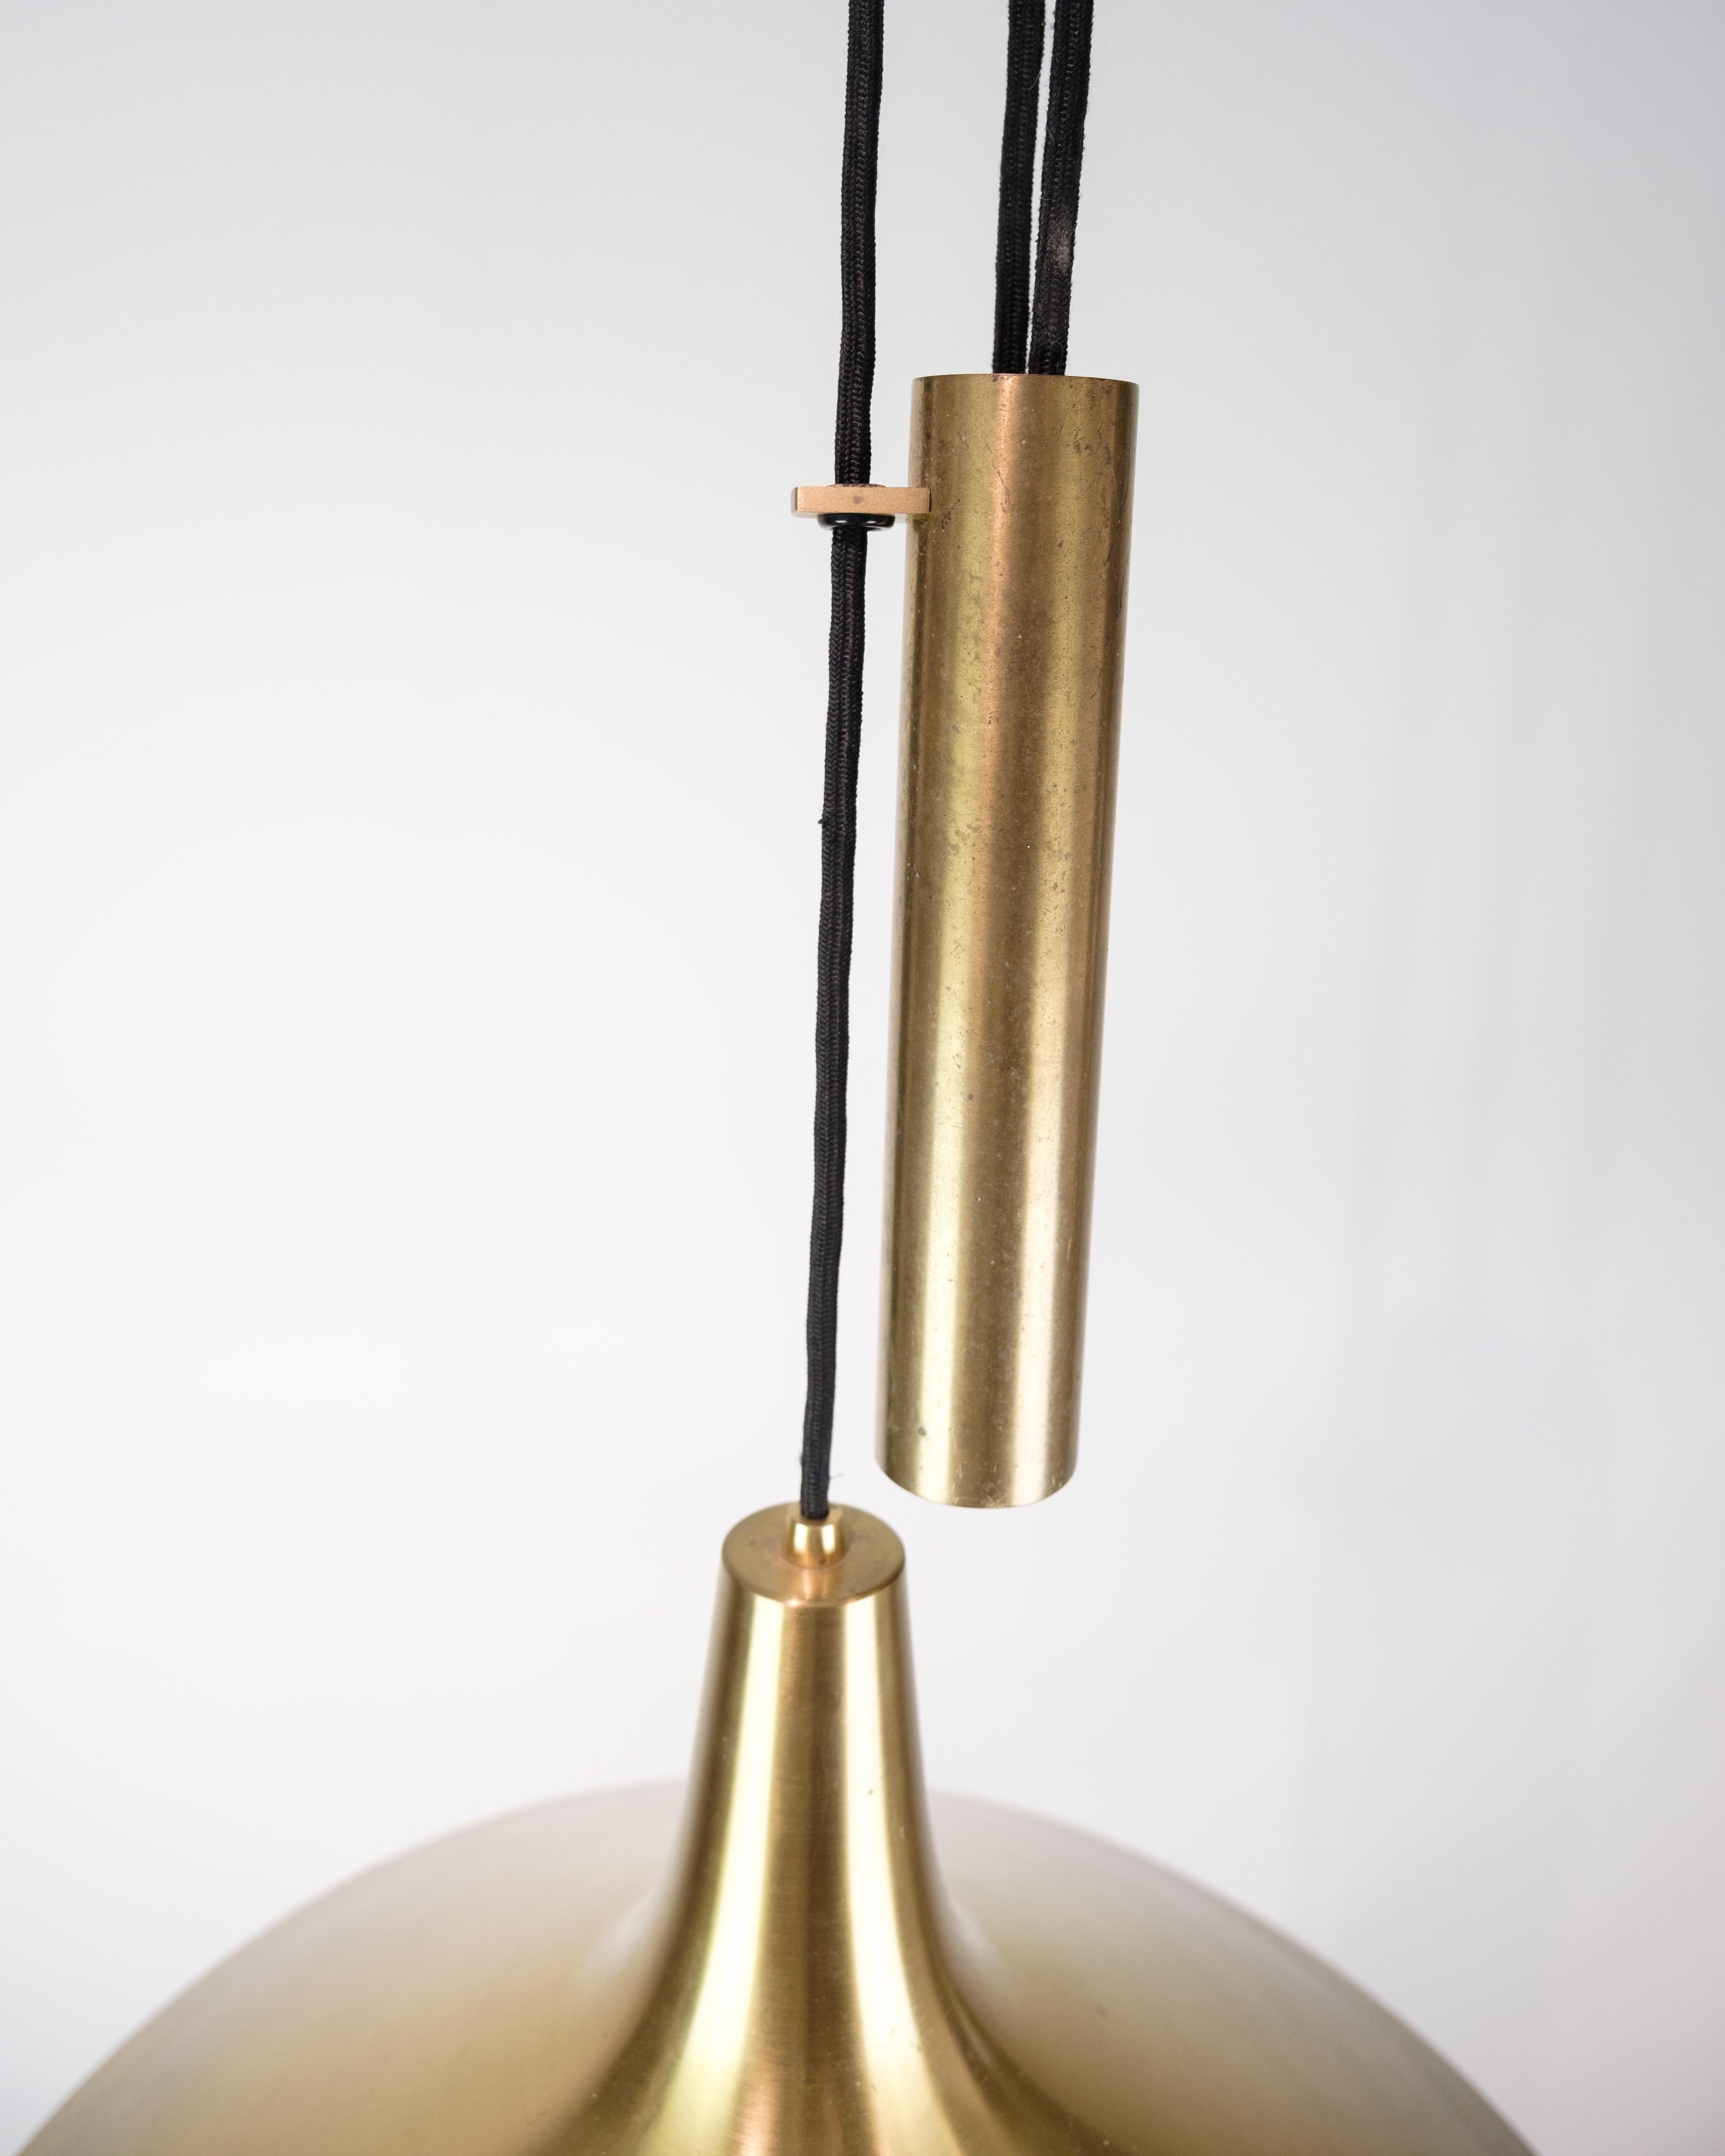 Ceiling lamp In Brass With a Counterweight Pendant, Made by Lyfa From 1960s For Sale 1